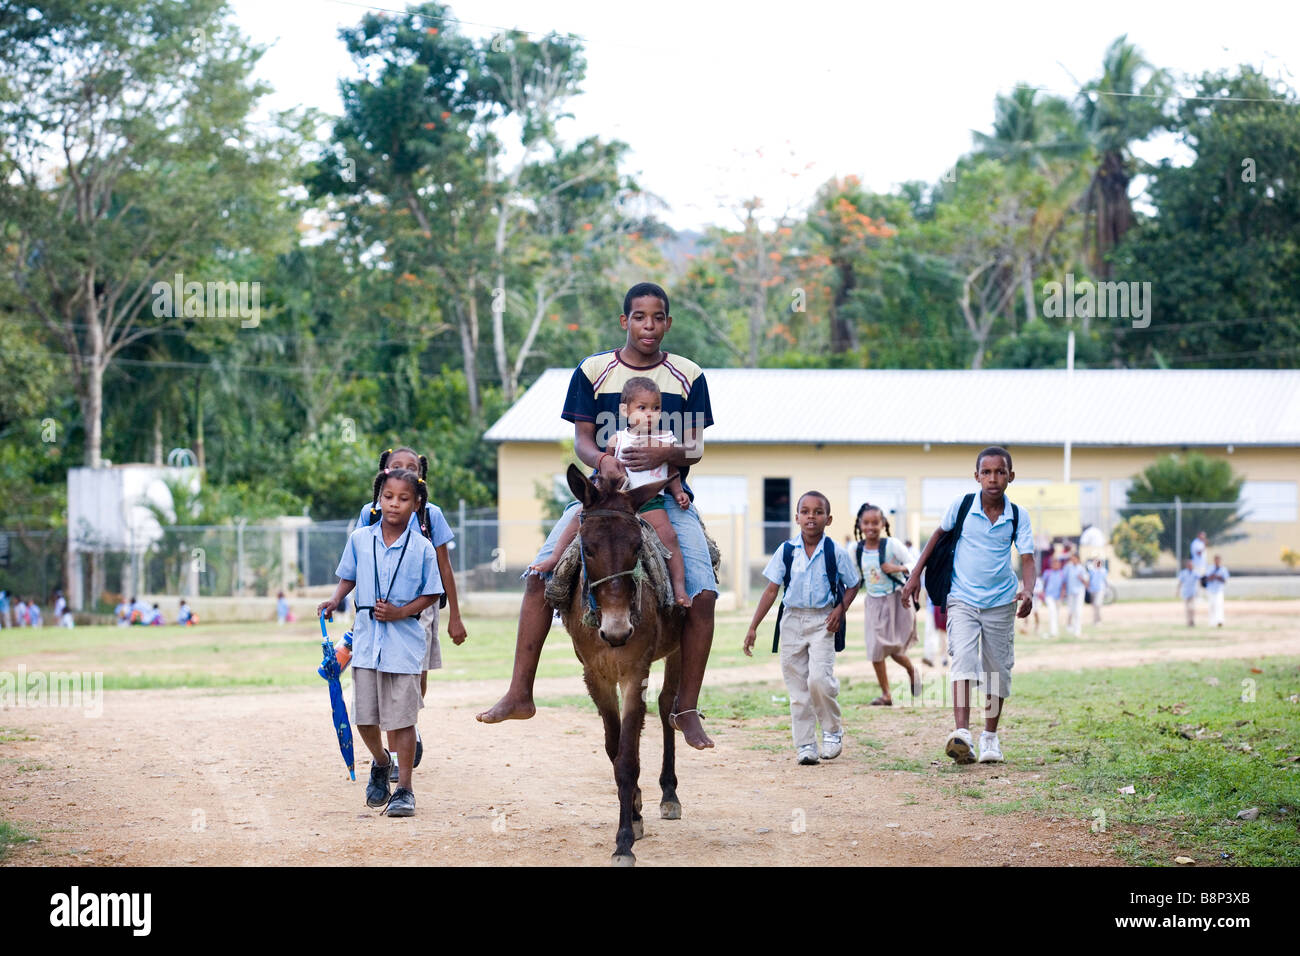 Young man with boy on horseback riding, Dominican Republic Stock Photo